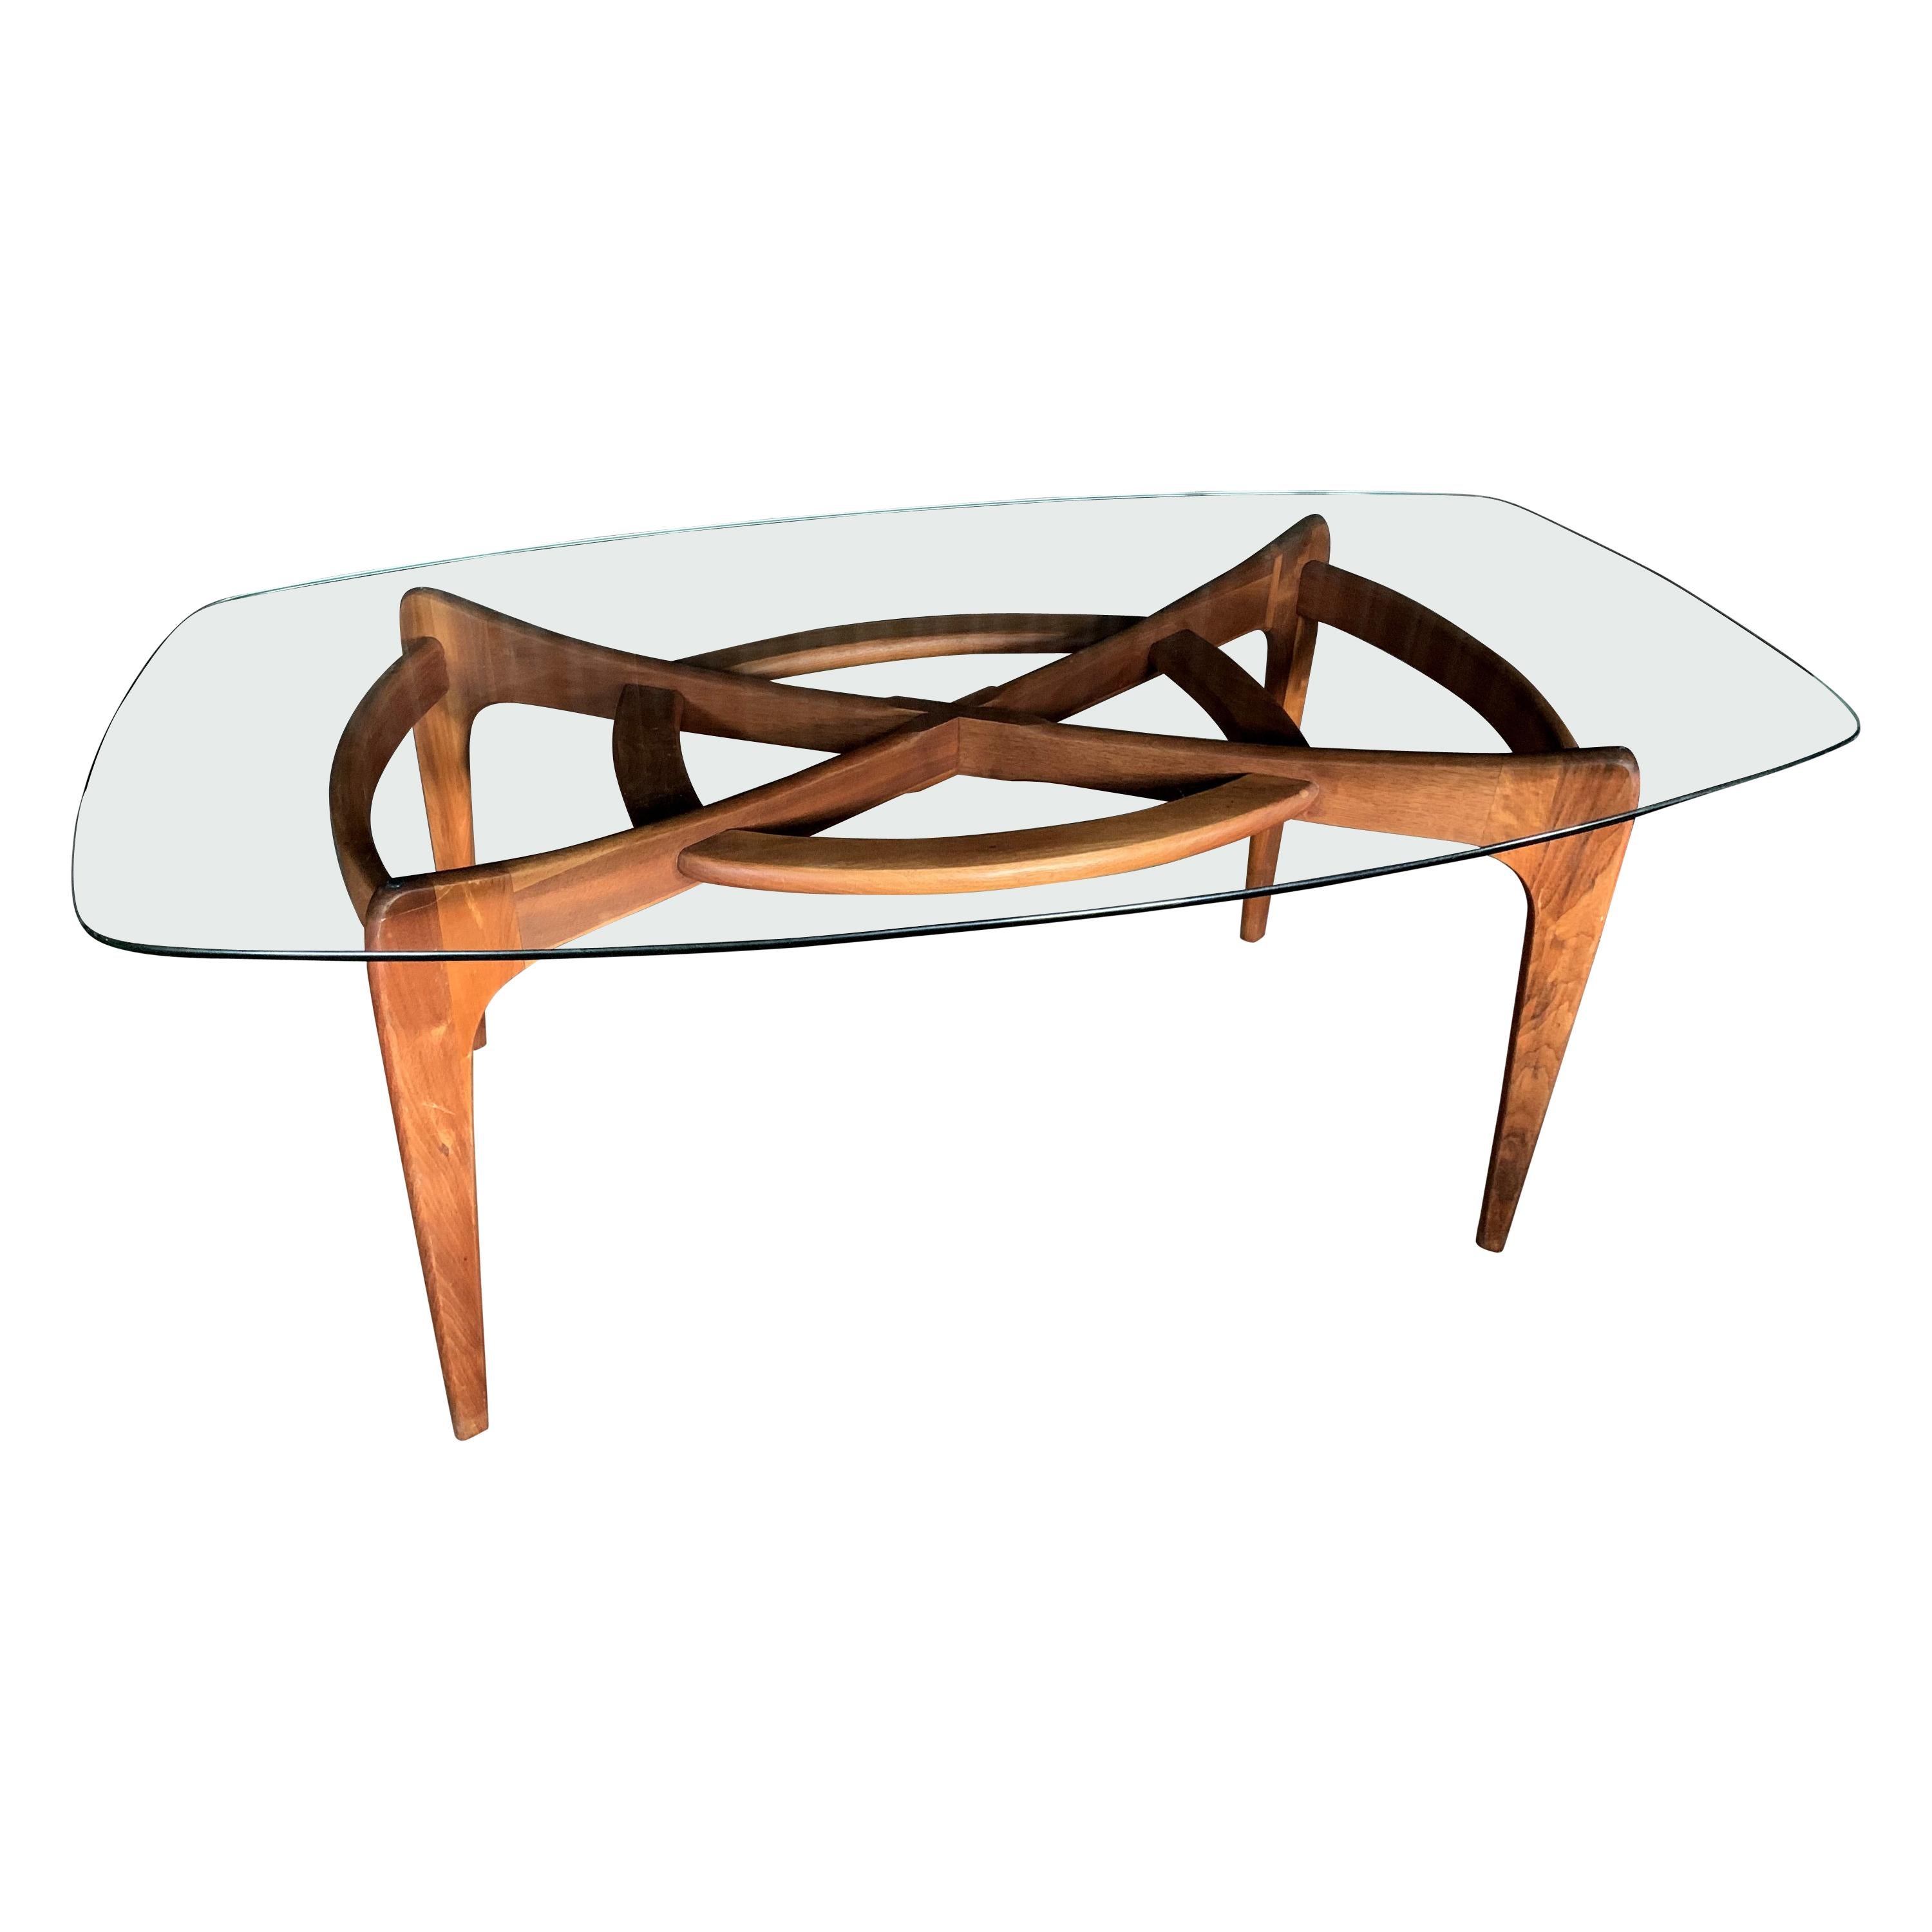 Adrian Pearsall for Craft Associates Dining Table with Glass